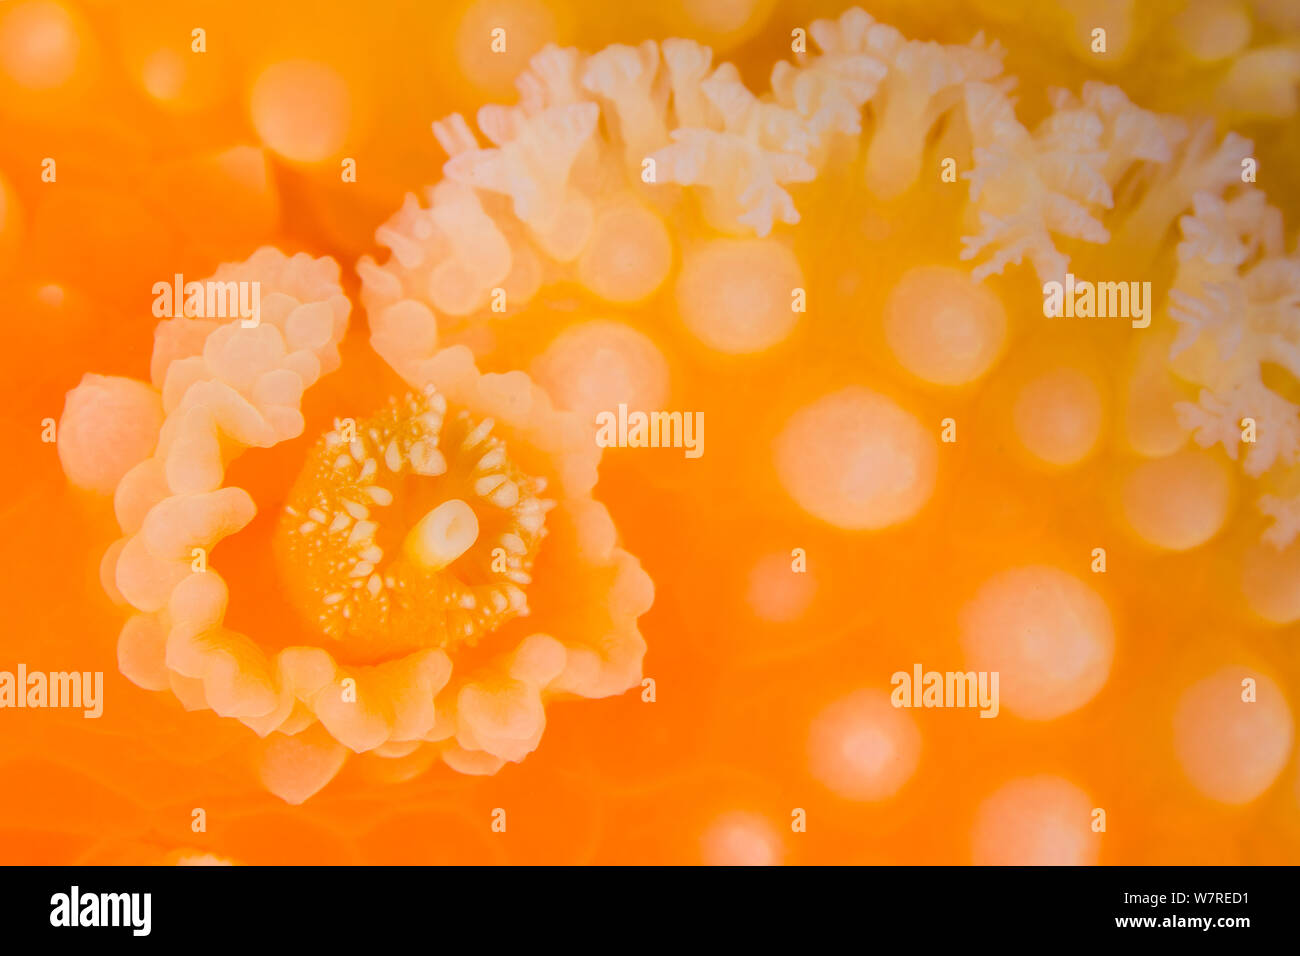 Detail of the sensory rhinophore of an Orange peel nudibranch (Tochuina tetraquetra). Browning Pass, Vancouver Island, British Columbia, Canada. North East Pacific Ocean. Stock Photo